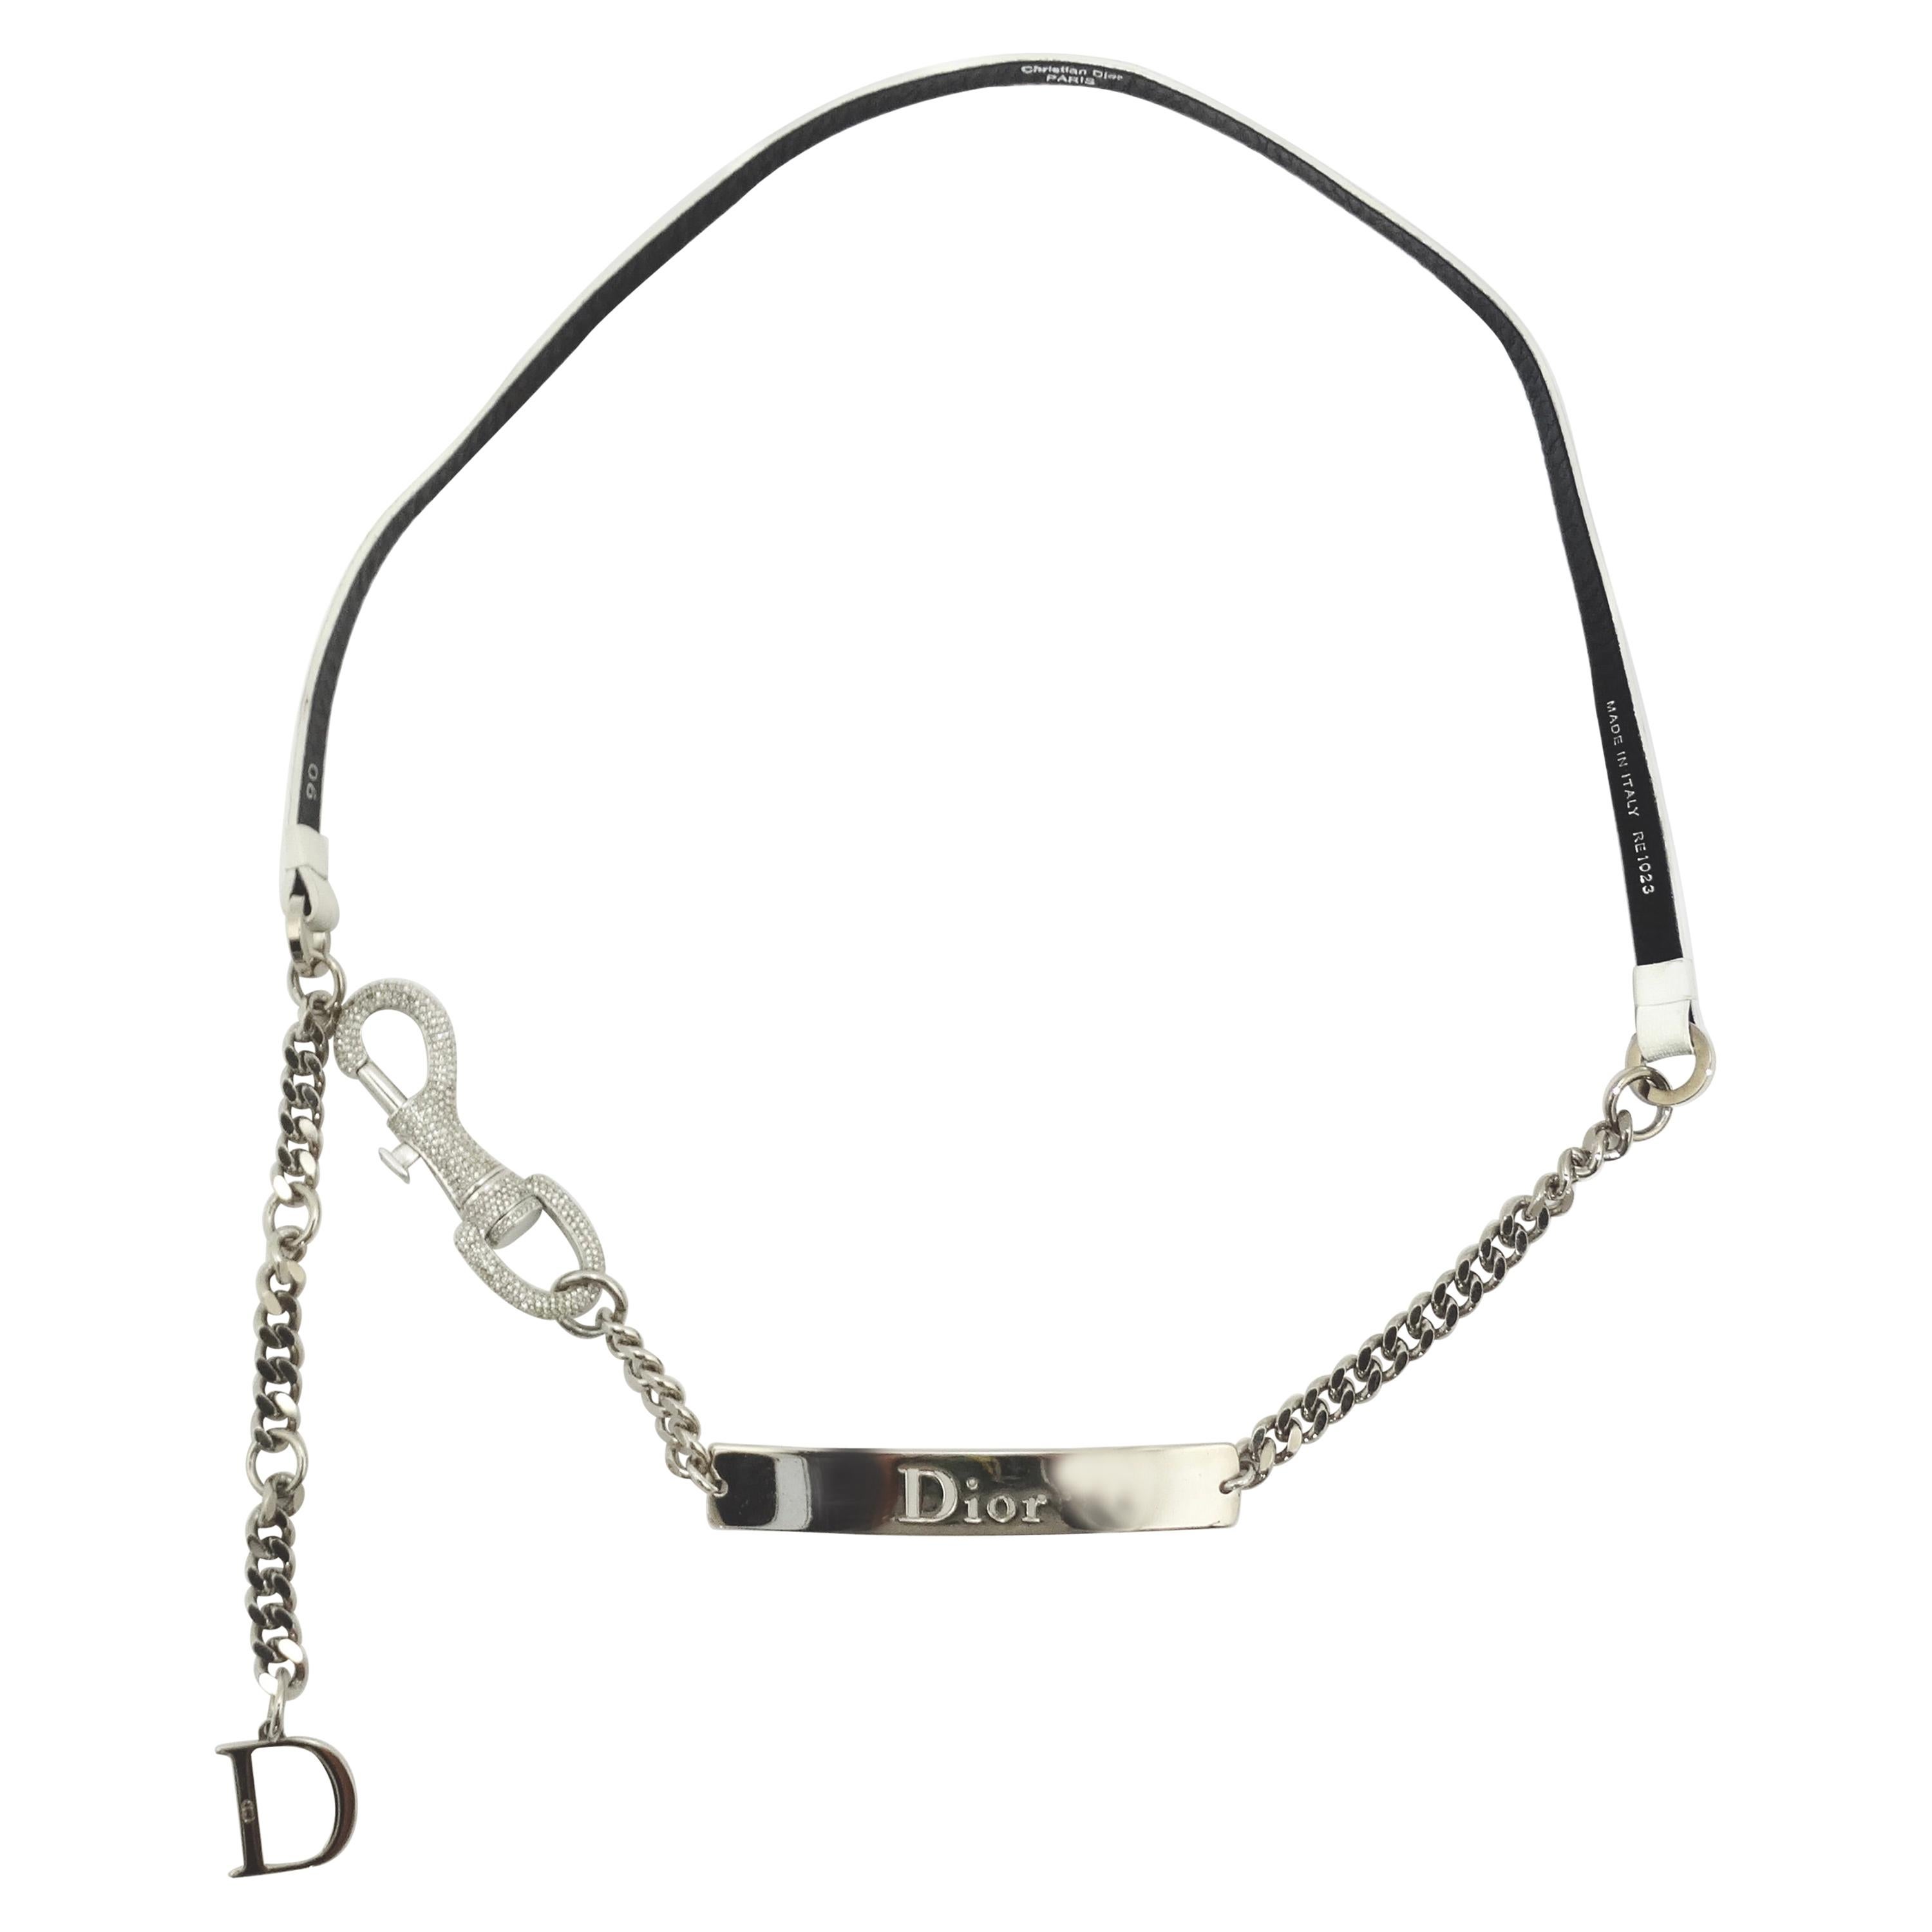 Galliano for Dior White Leather Chain Belt